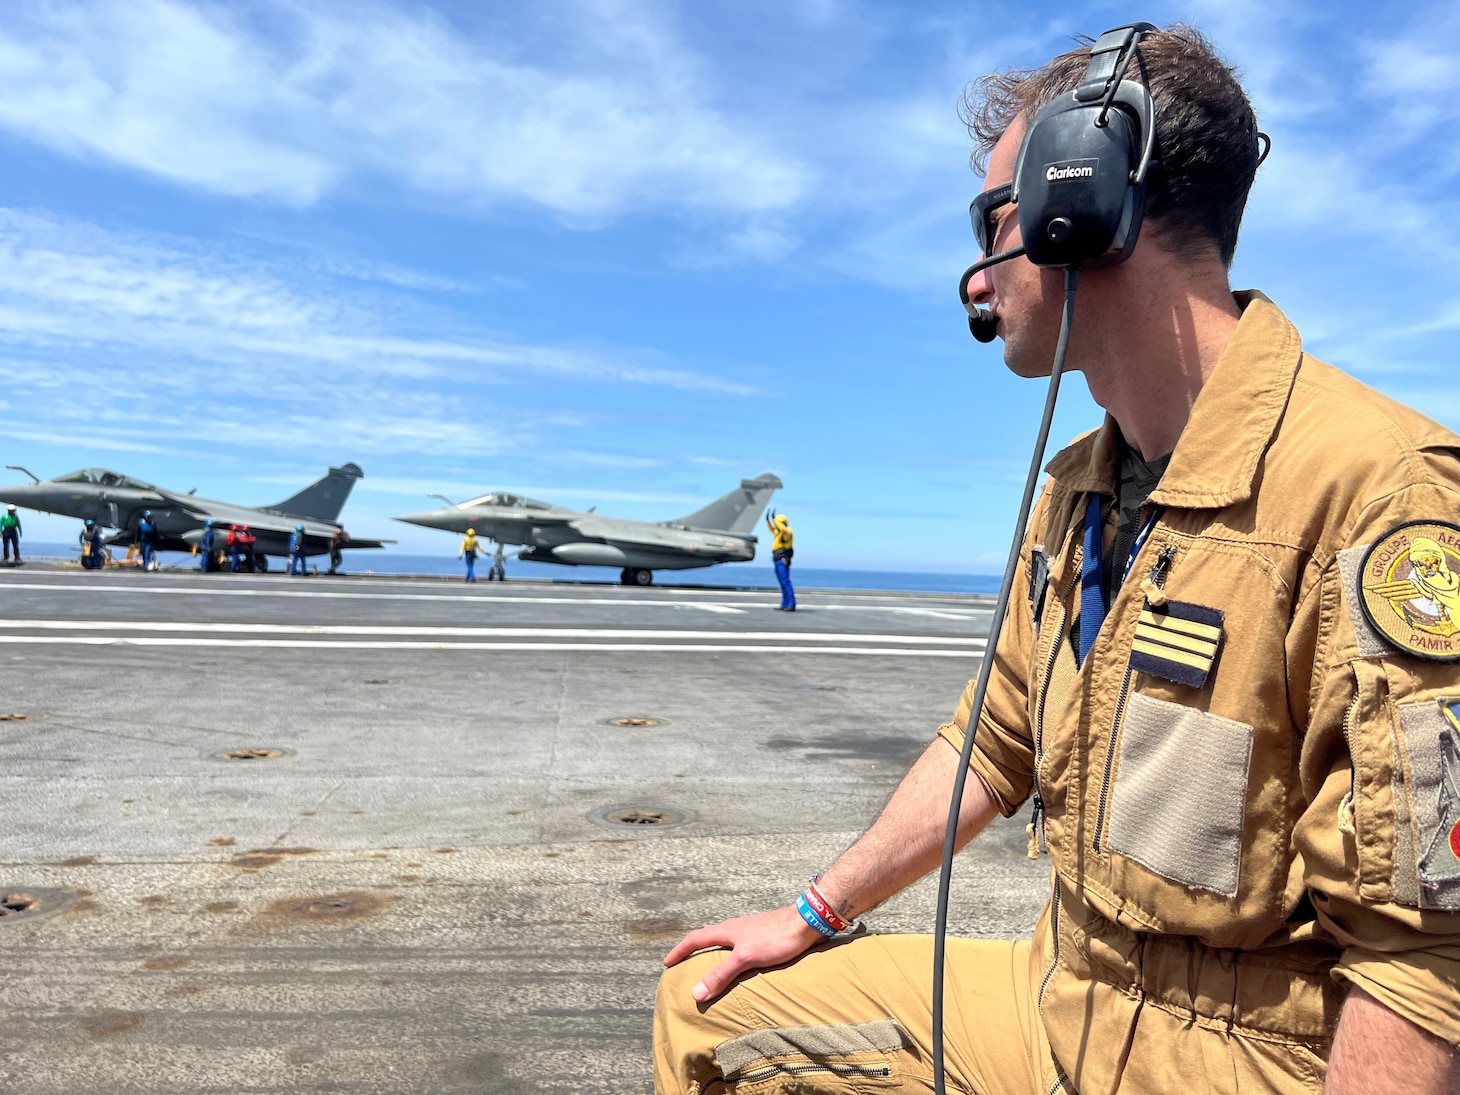 The Landing Signal Officer (LSO) School is the launching pad for all LSOs in the U.S. Navy. The school provides their initial training on providing safe and expeditious landings of aircraft on aircraft carriers.